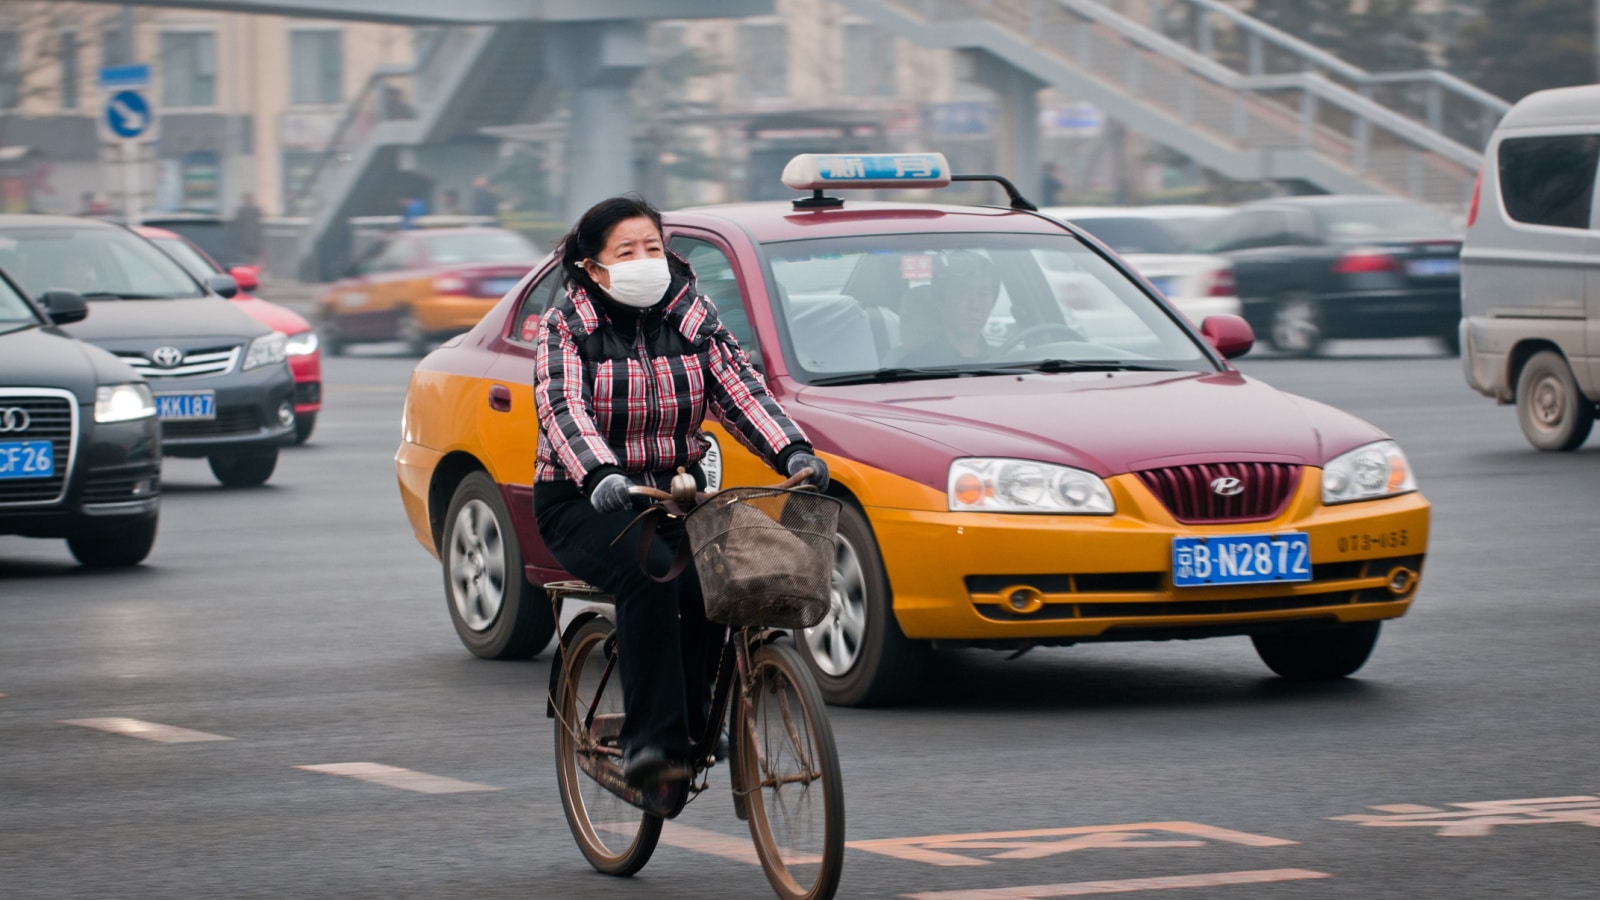 BEIJING, CHINA - MARCH 31: Woman with protective mask rides bike on a busy street in Dongcheng District on March 31, 2013 in Beijing